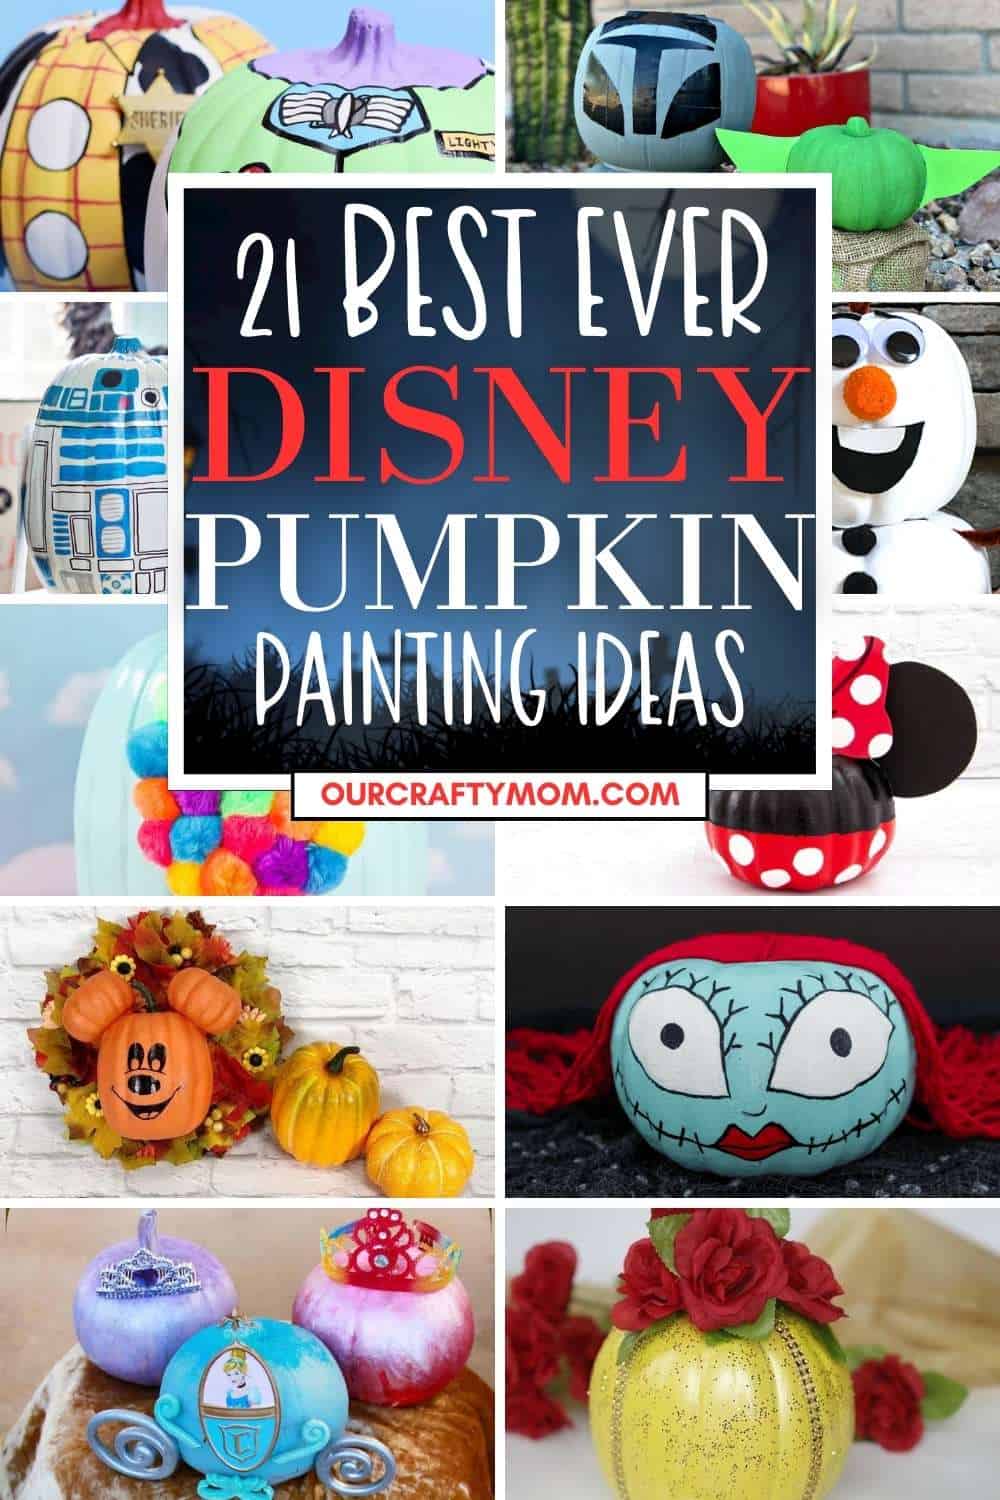 disney pumpkin painting ideas pin collage with text